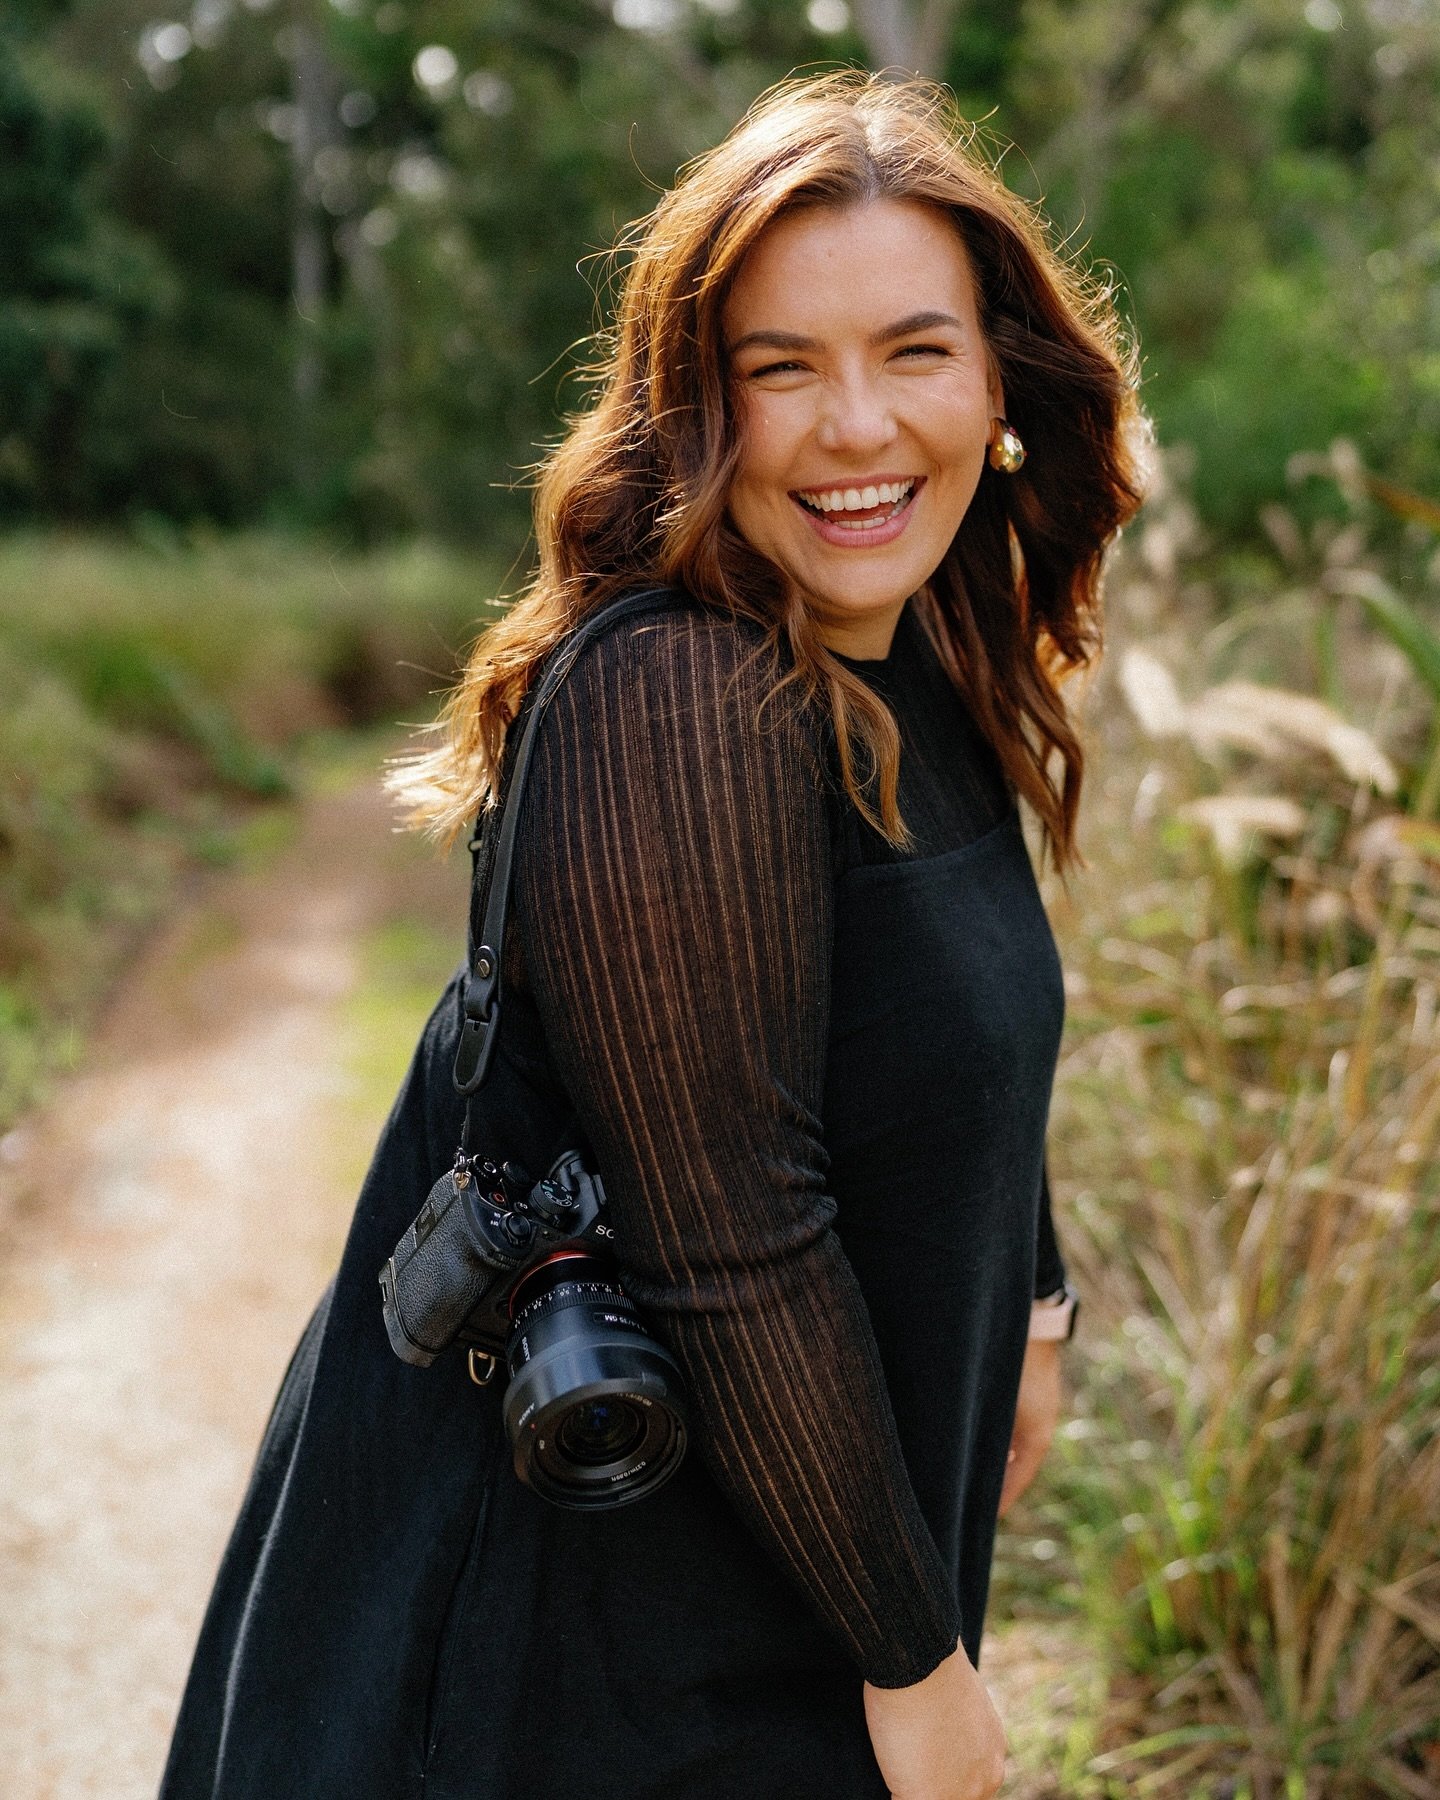 🌟 Hey there!!! I thought it was time I reintroduced myself as it&rsquo;s been a little while since the last time! 

I am Alana, the face behind the camera ☺️ I have been a photographer for the most part of my life now and I am all about slow living 